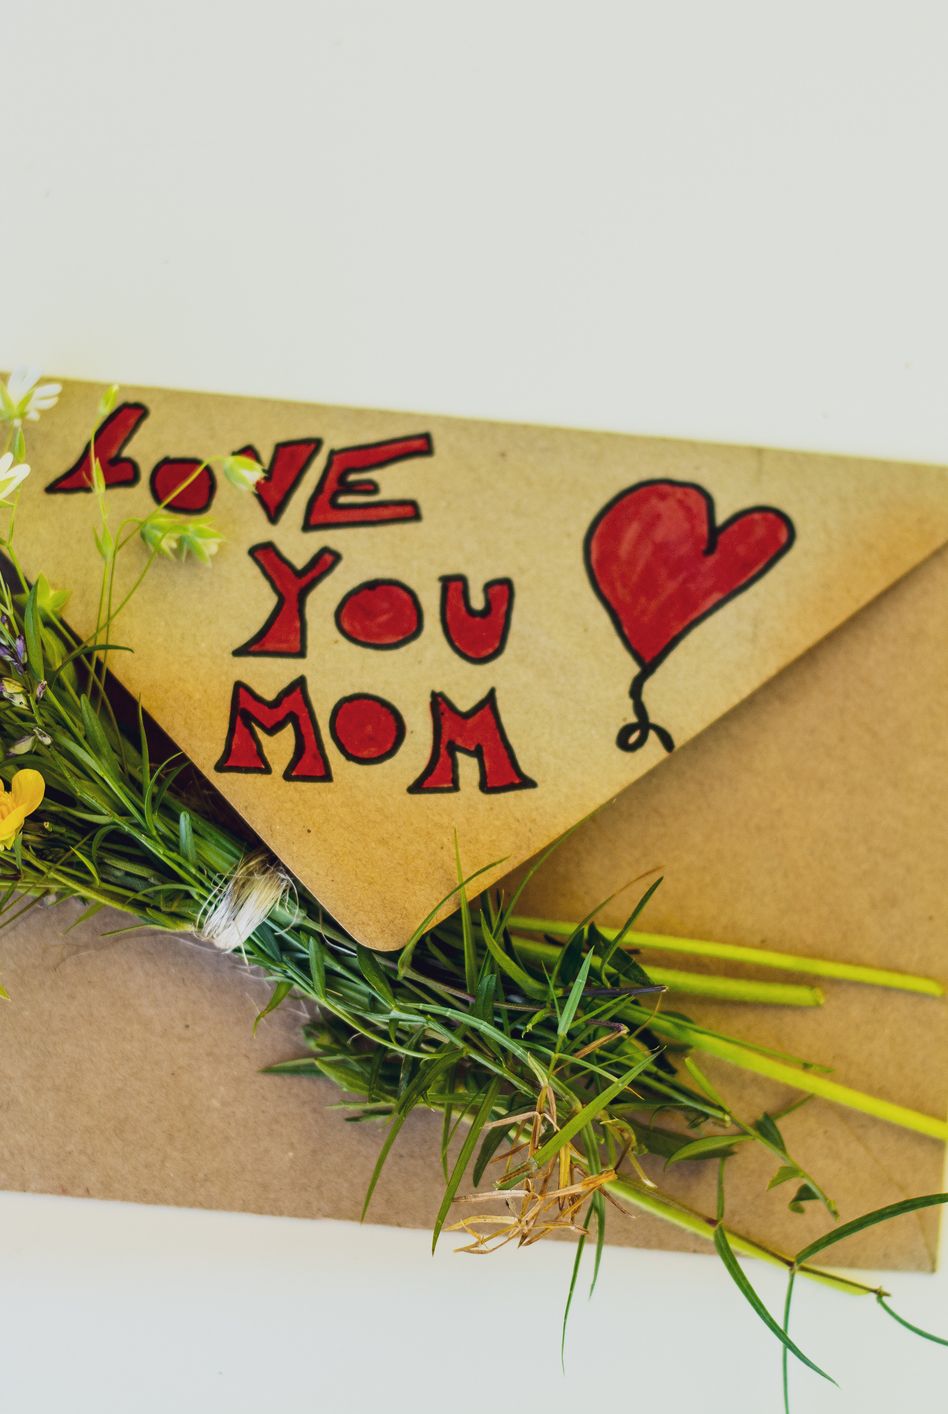 mother's day greeting envelope and a bouquet of flowers, on white background